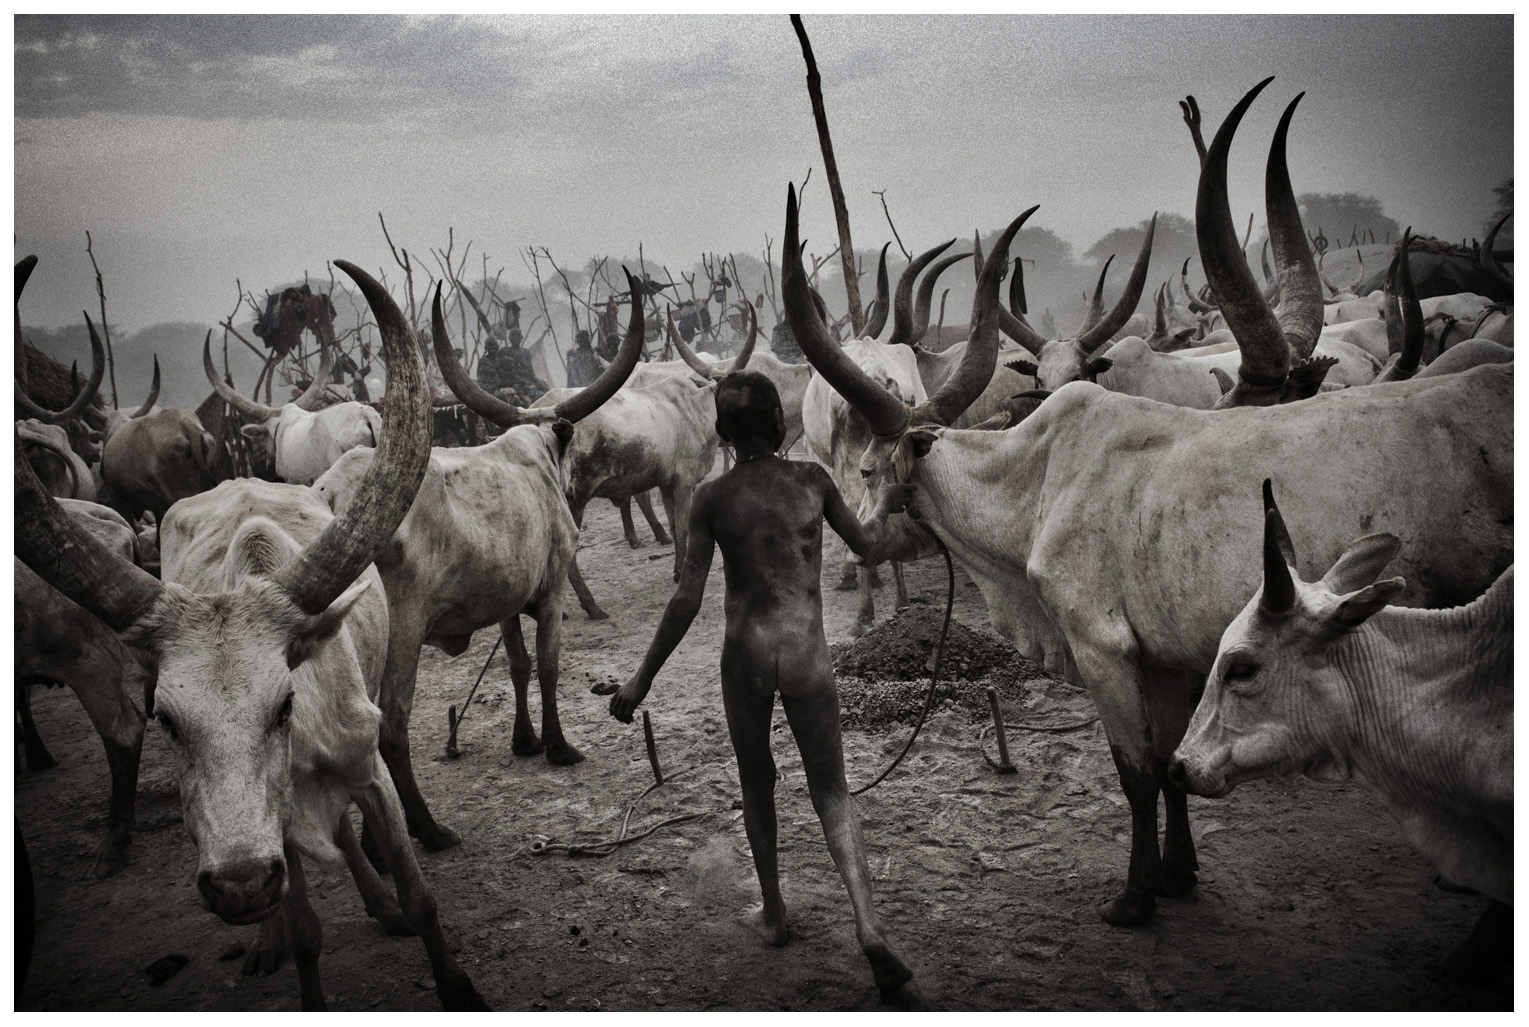  South Sudan. 23 March 2011.

A Dinka boy among cattle in the enclosure of a cattle camp following the herds in areas that maintain water and pasture during the dry season. 